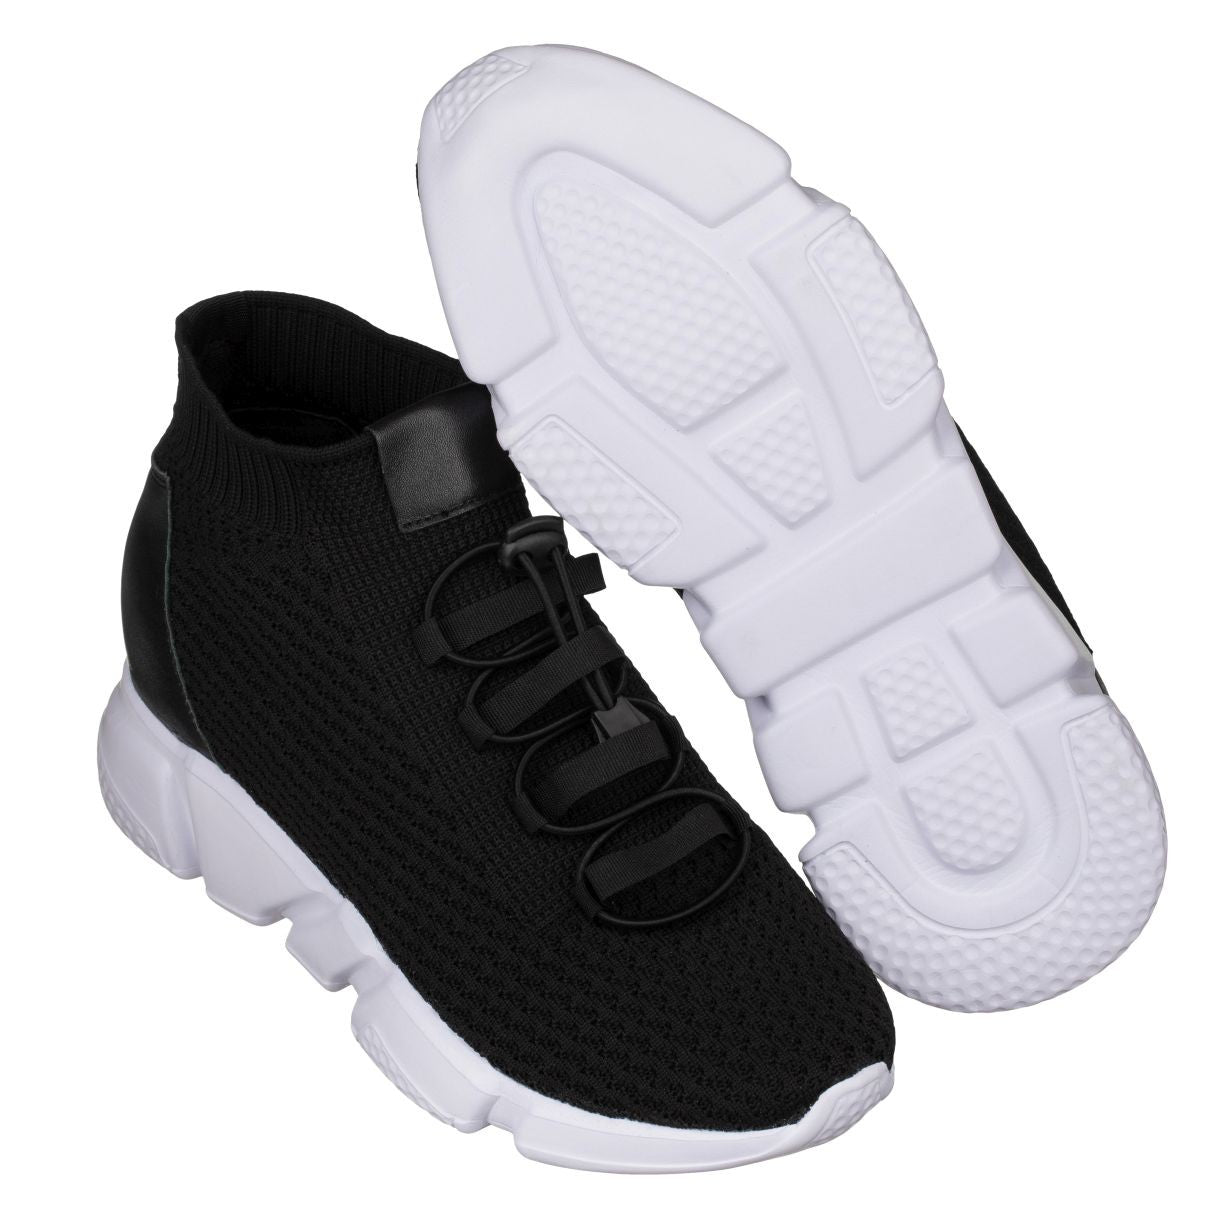 Elevator shoes height increase CALTO - H1721 - 3.2 Inches Taller (Black) - Ultra Lightweight